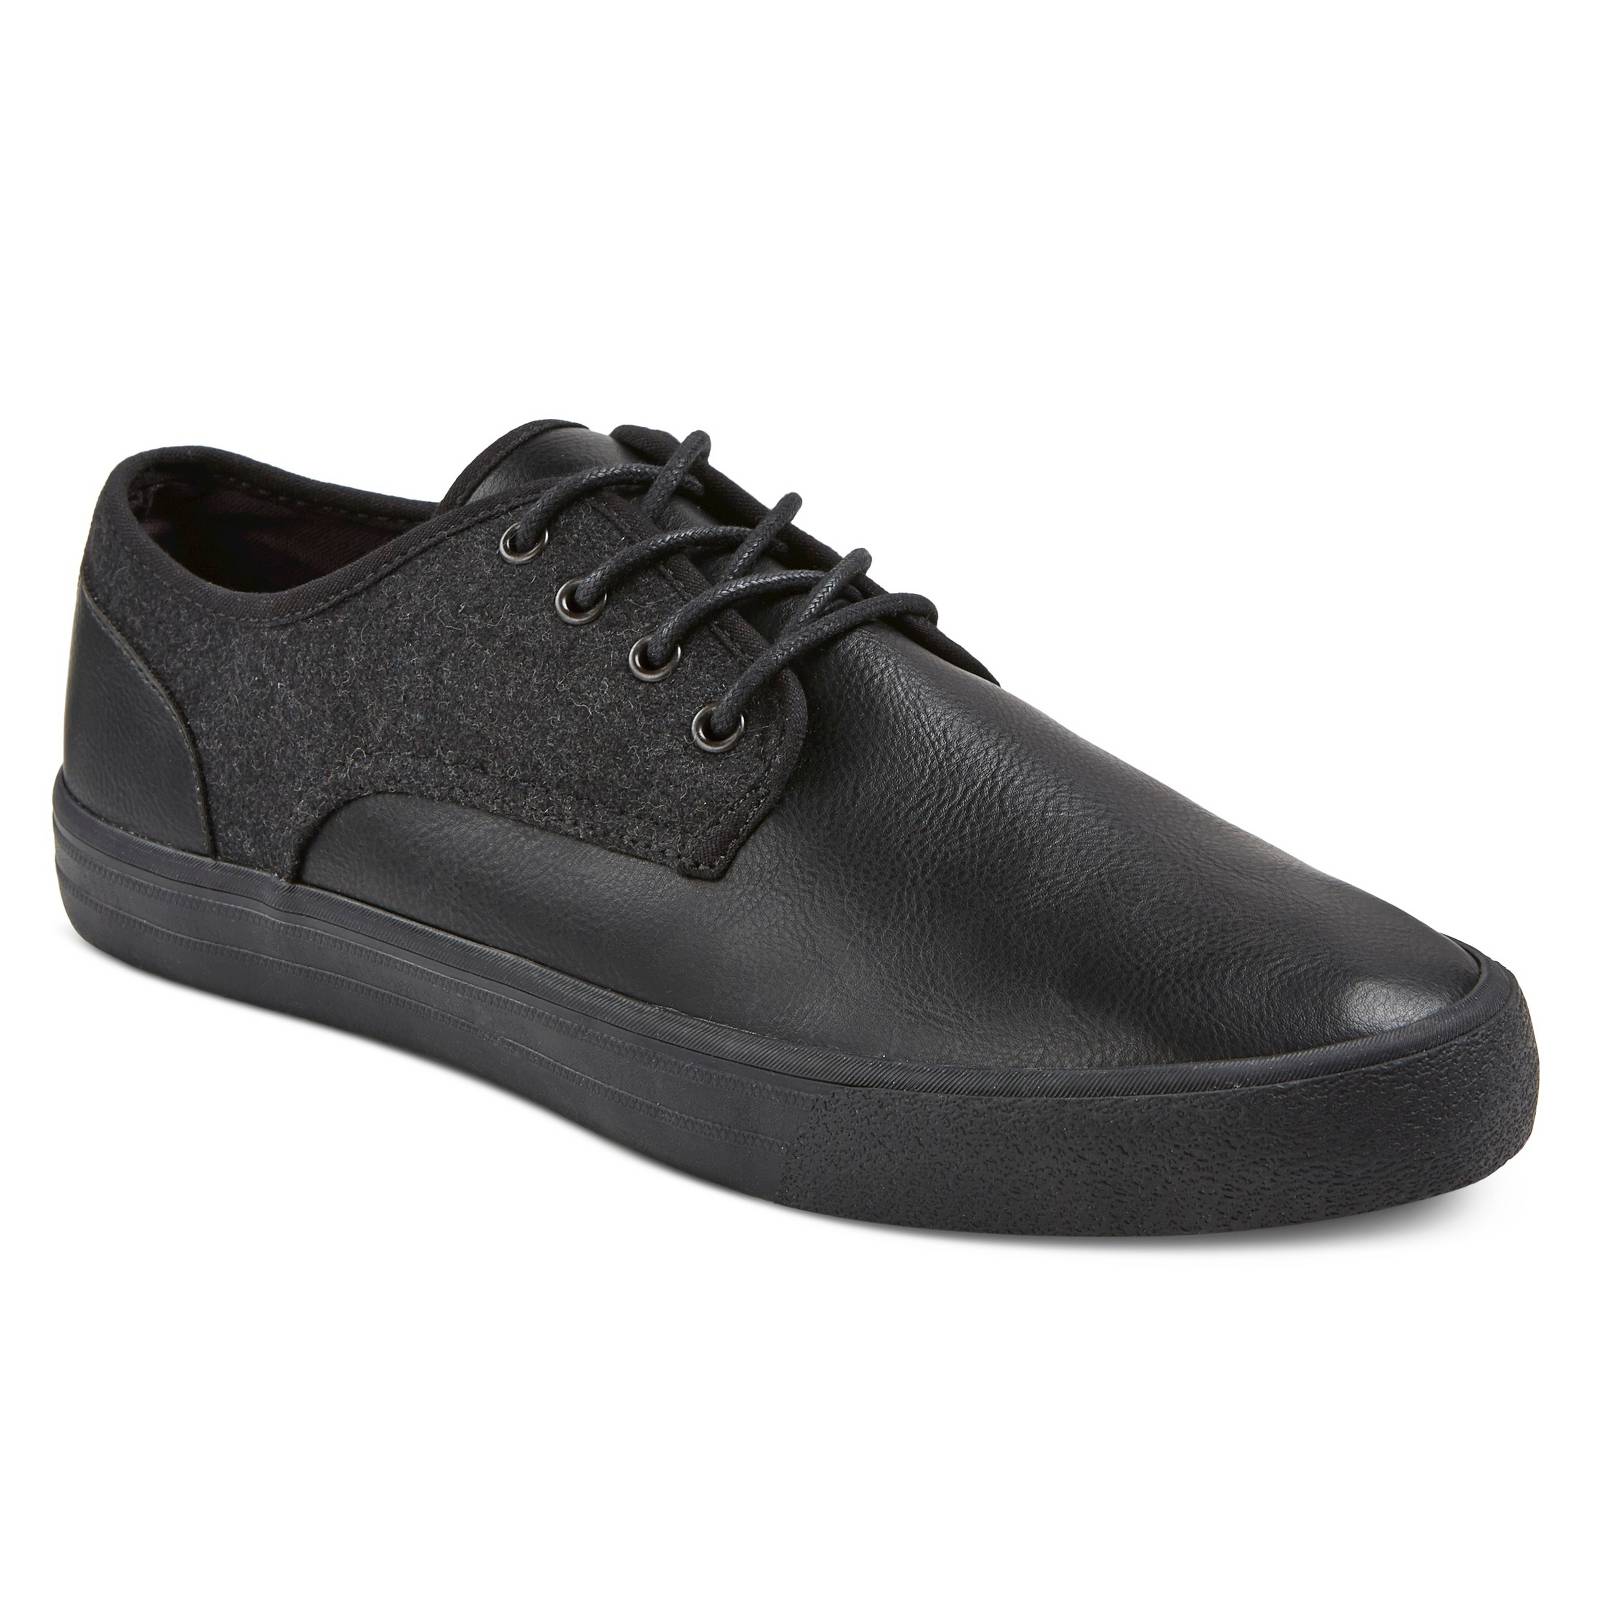 Men's Adam Lace-Up Sneakers Black - Mossimo Supply Co.™ | eBay